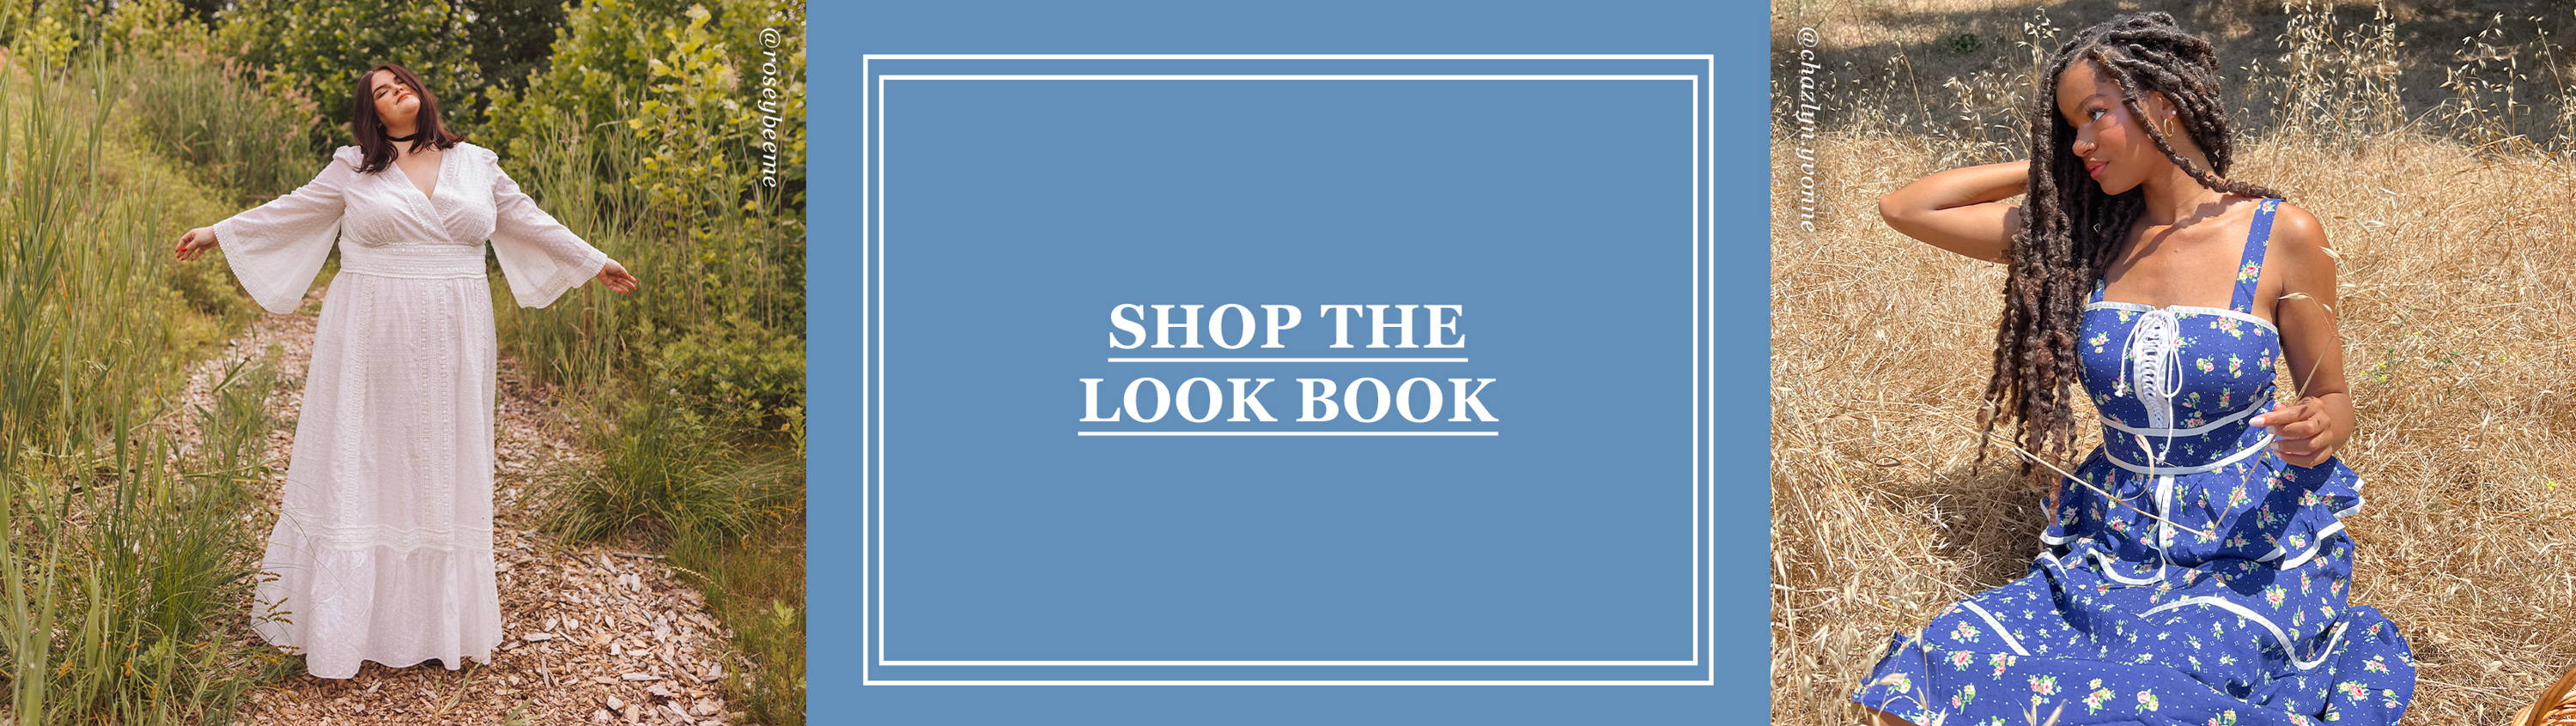 Shop the Look Book!